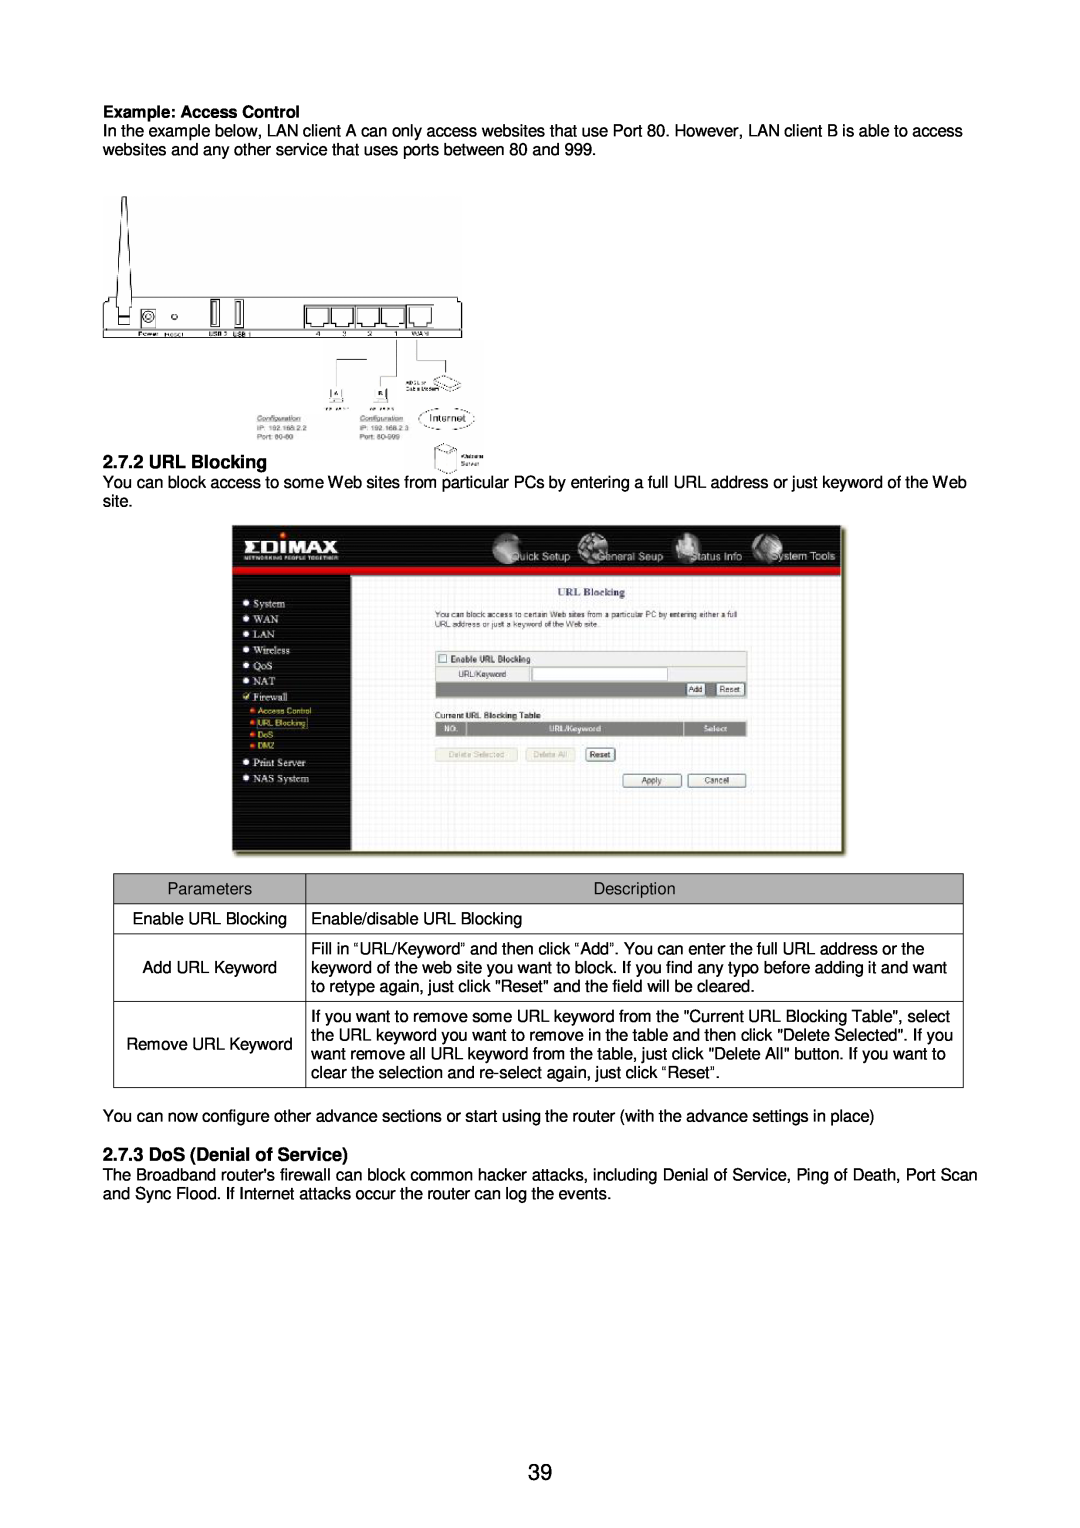 Edimax Technology Broadband Router manual URL Blocking, DoS Denial of Service, Example Access Control 